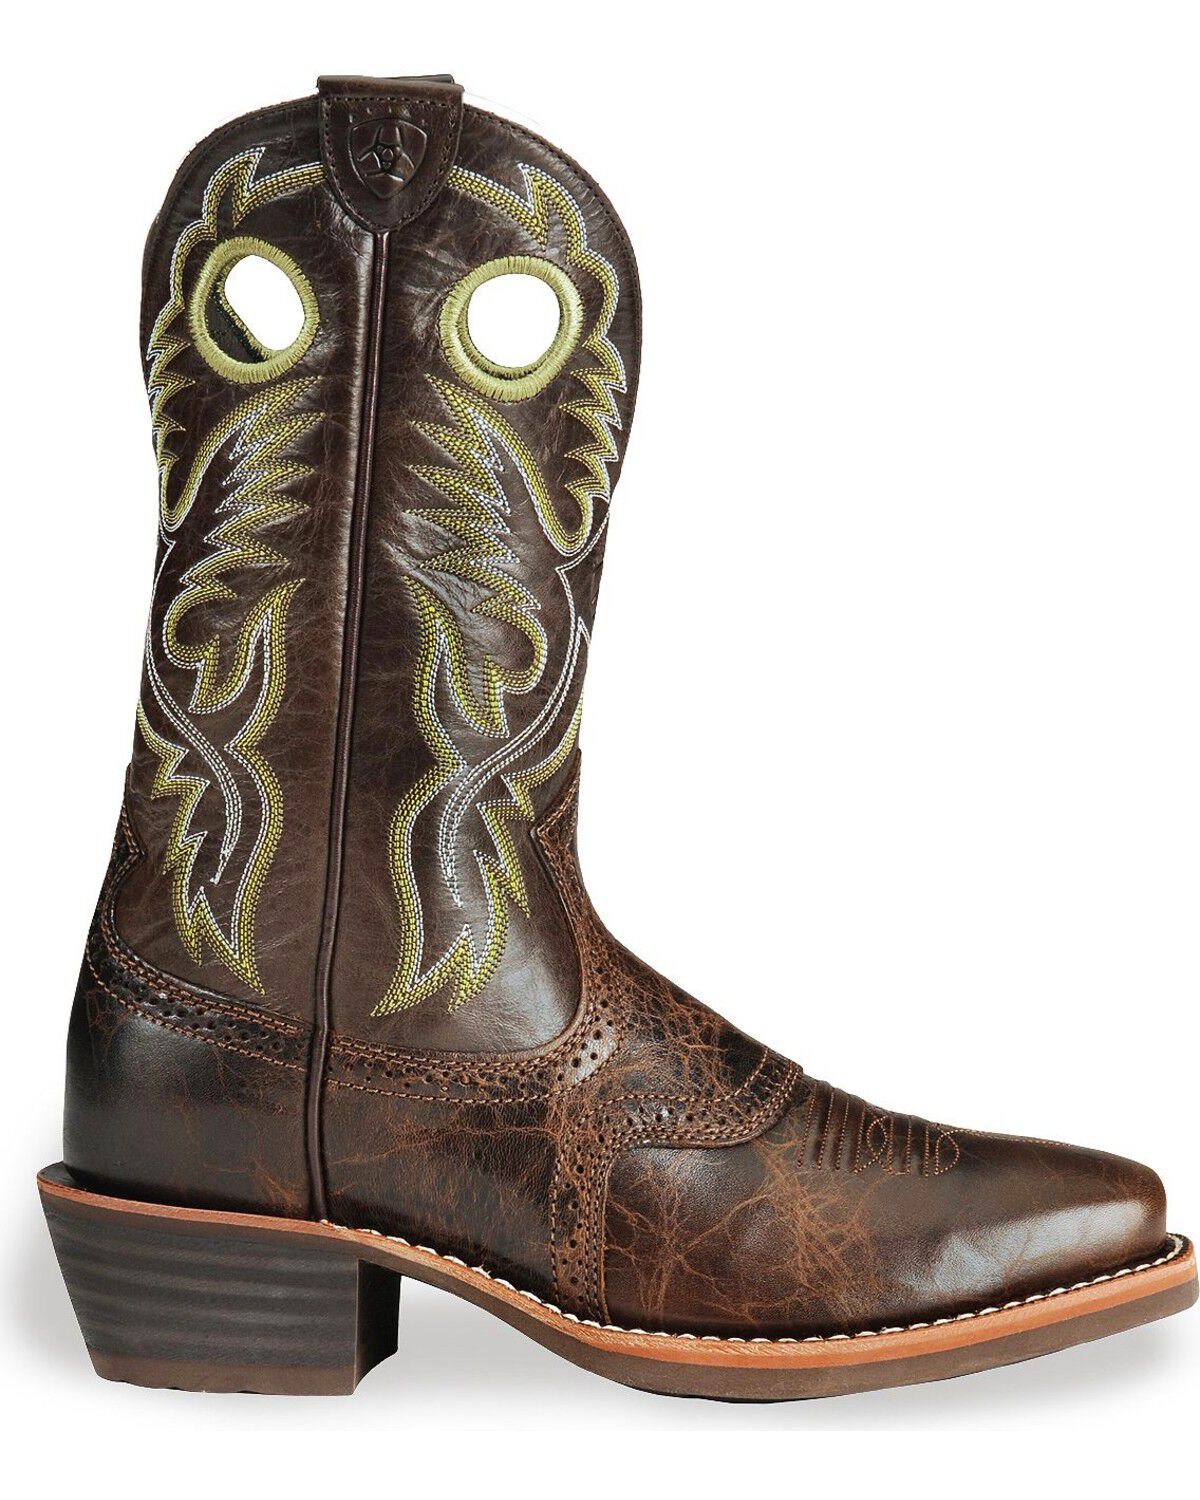 boot barn ariat boots